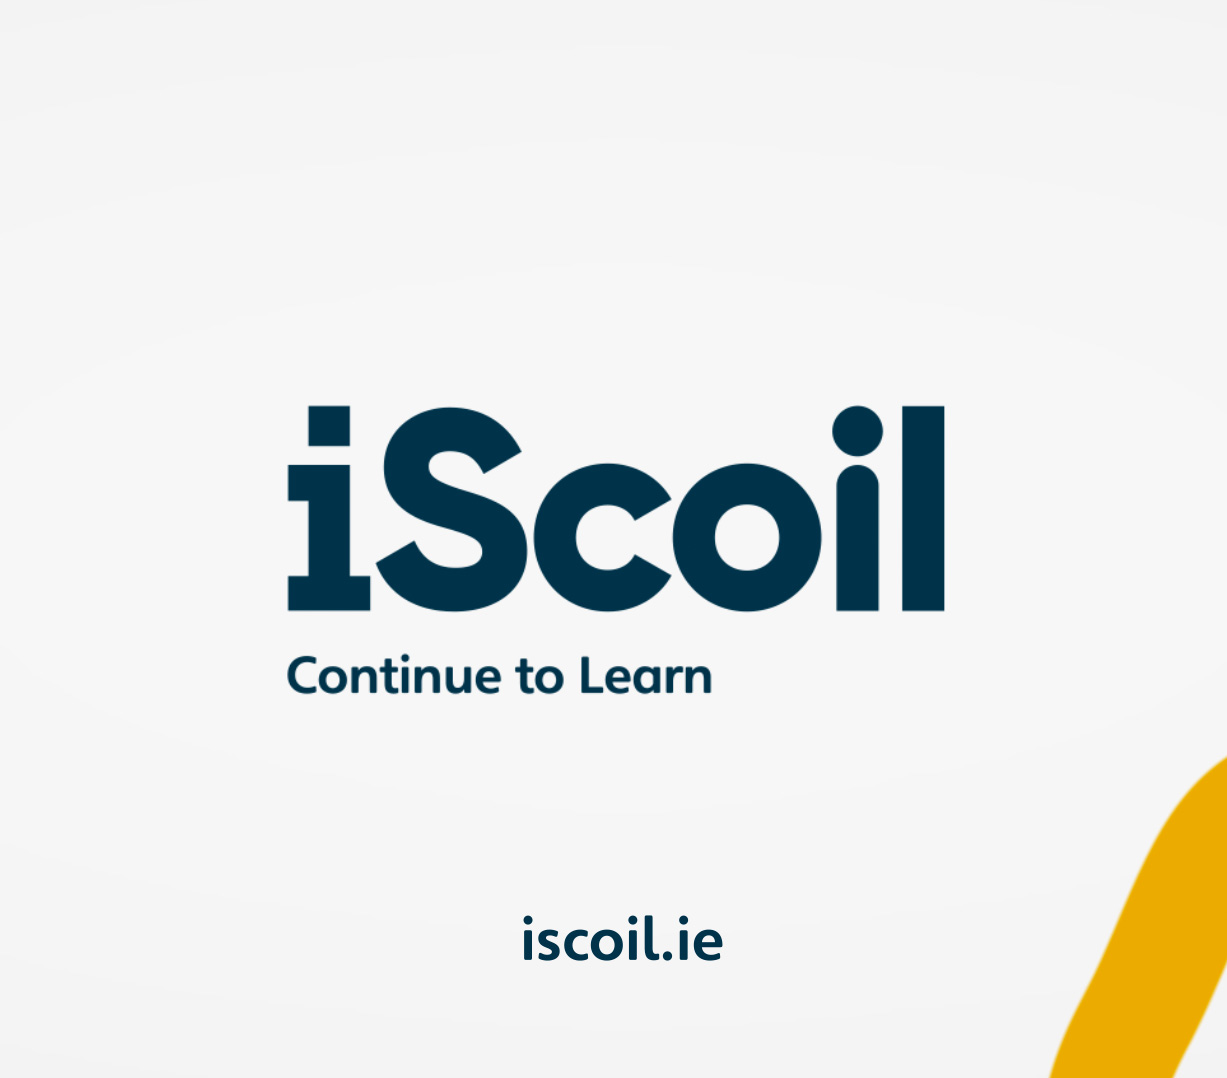 iScoil branded graphics